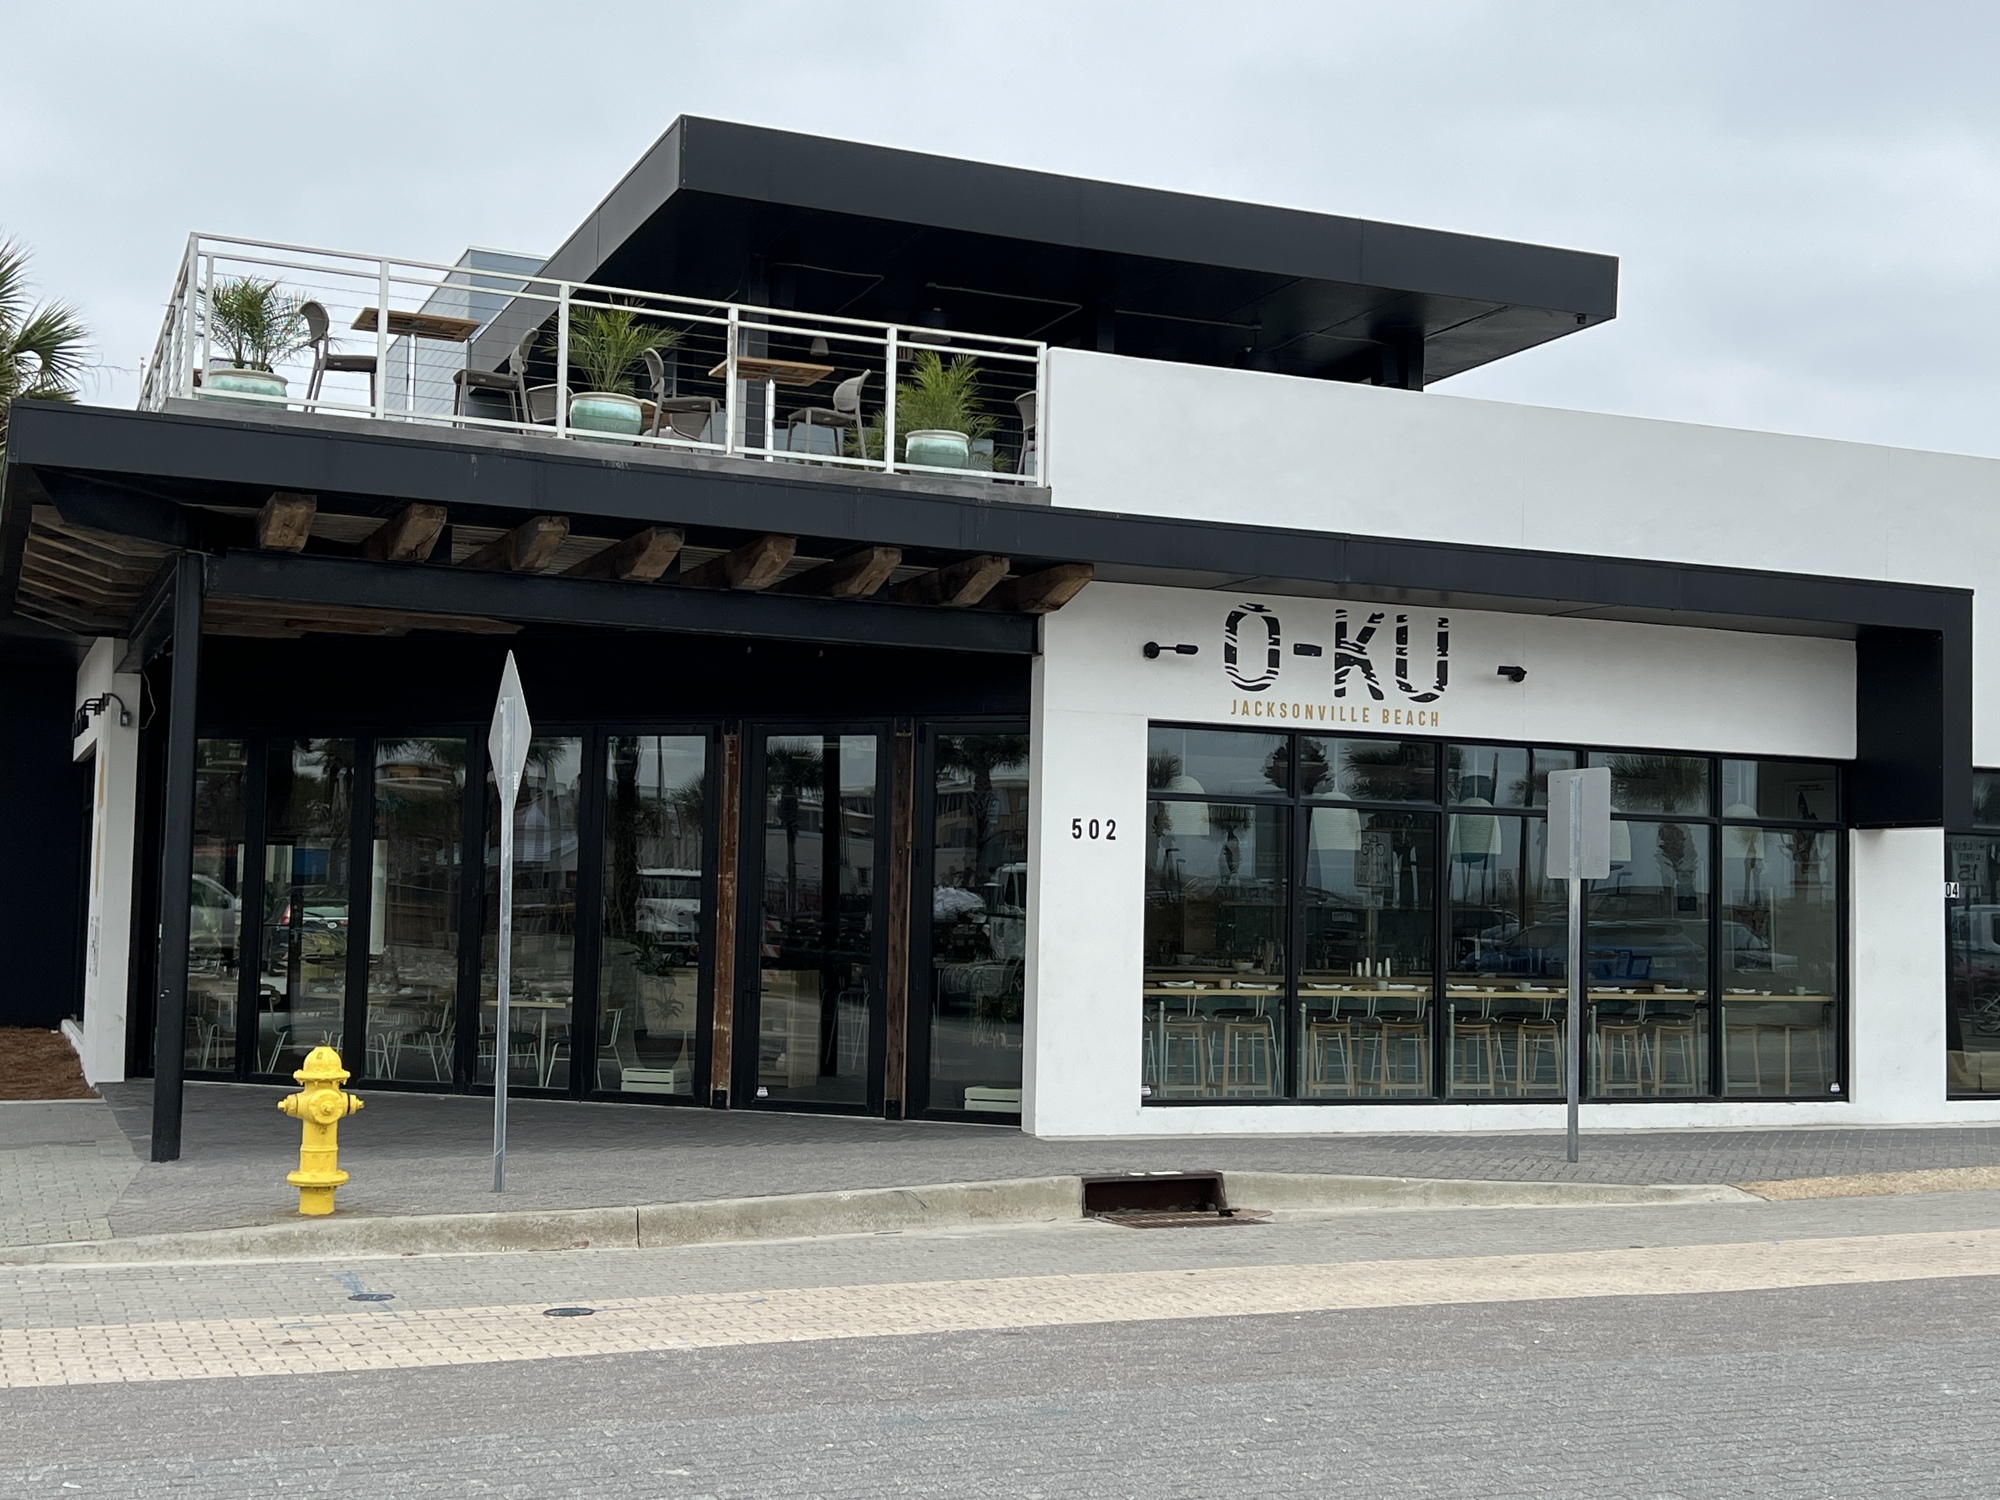 O-Ku is open from 5-10 p.m. Tuesday through Saturday, according to its website.